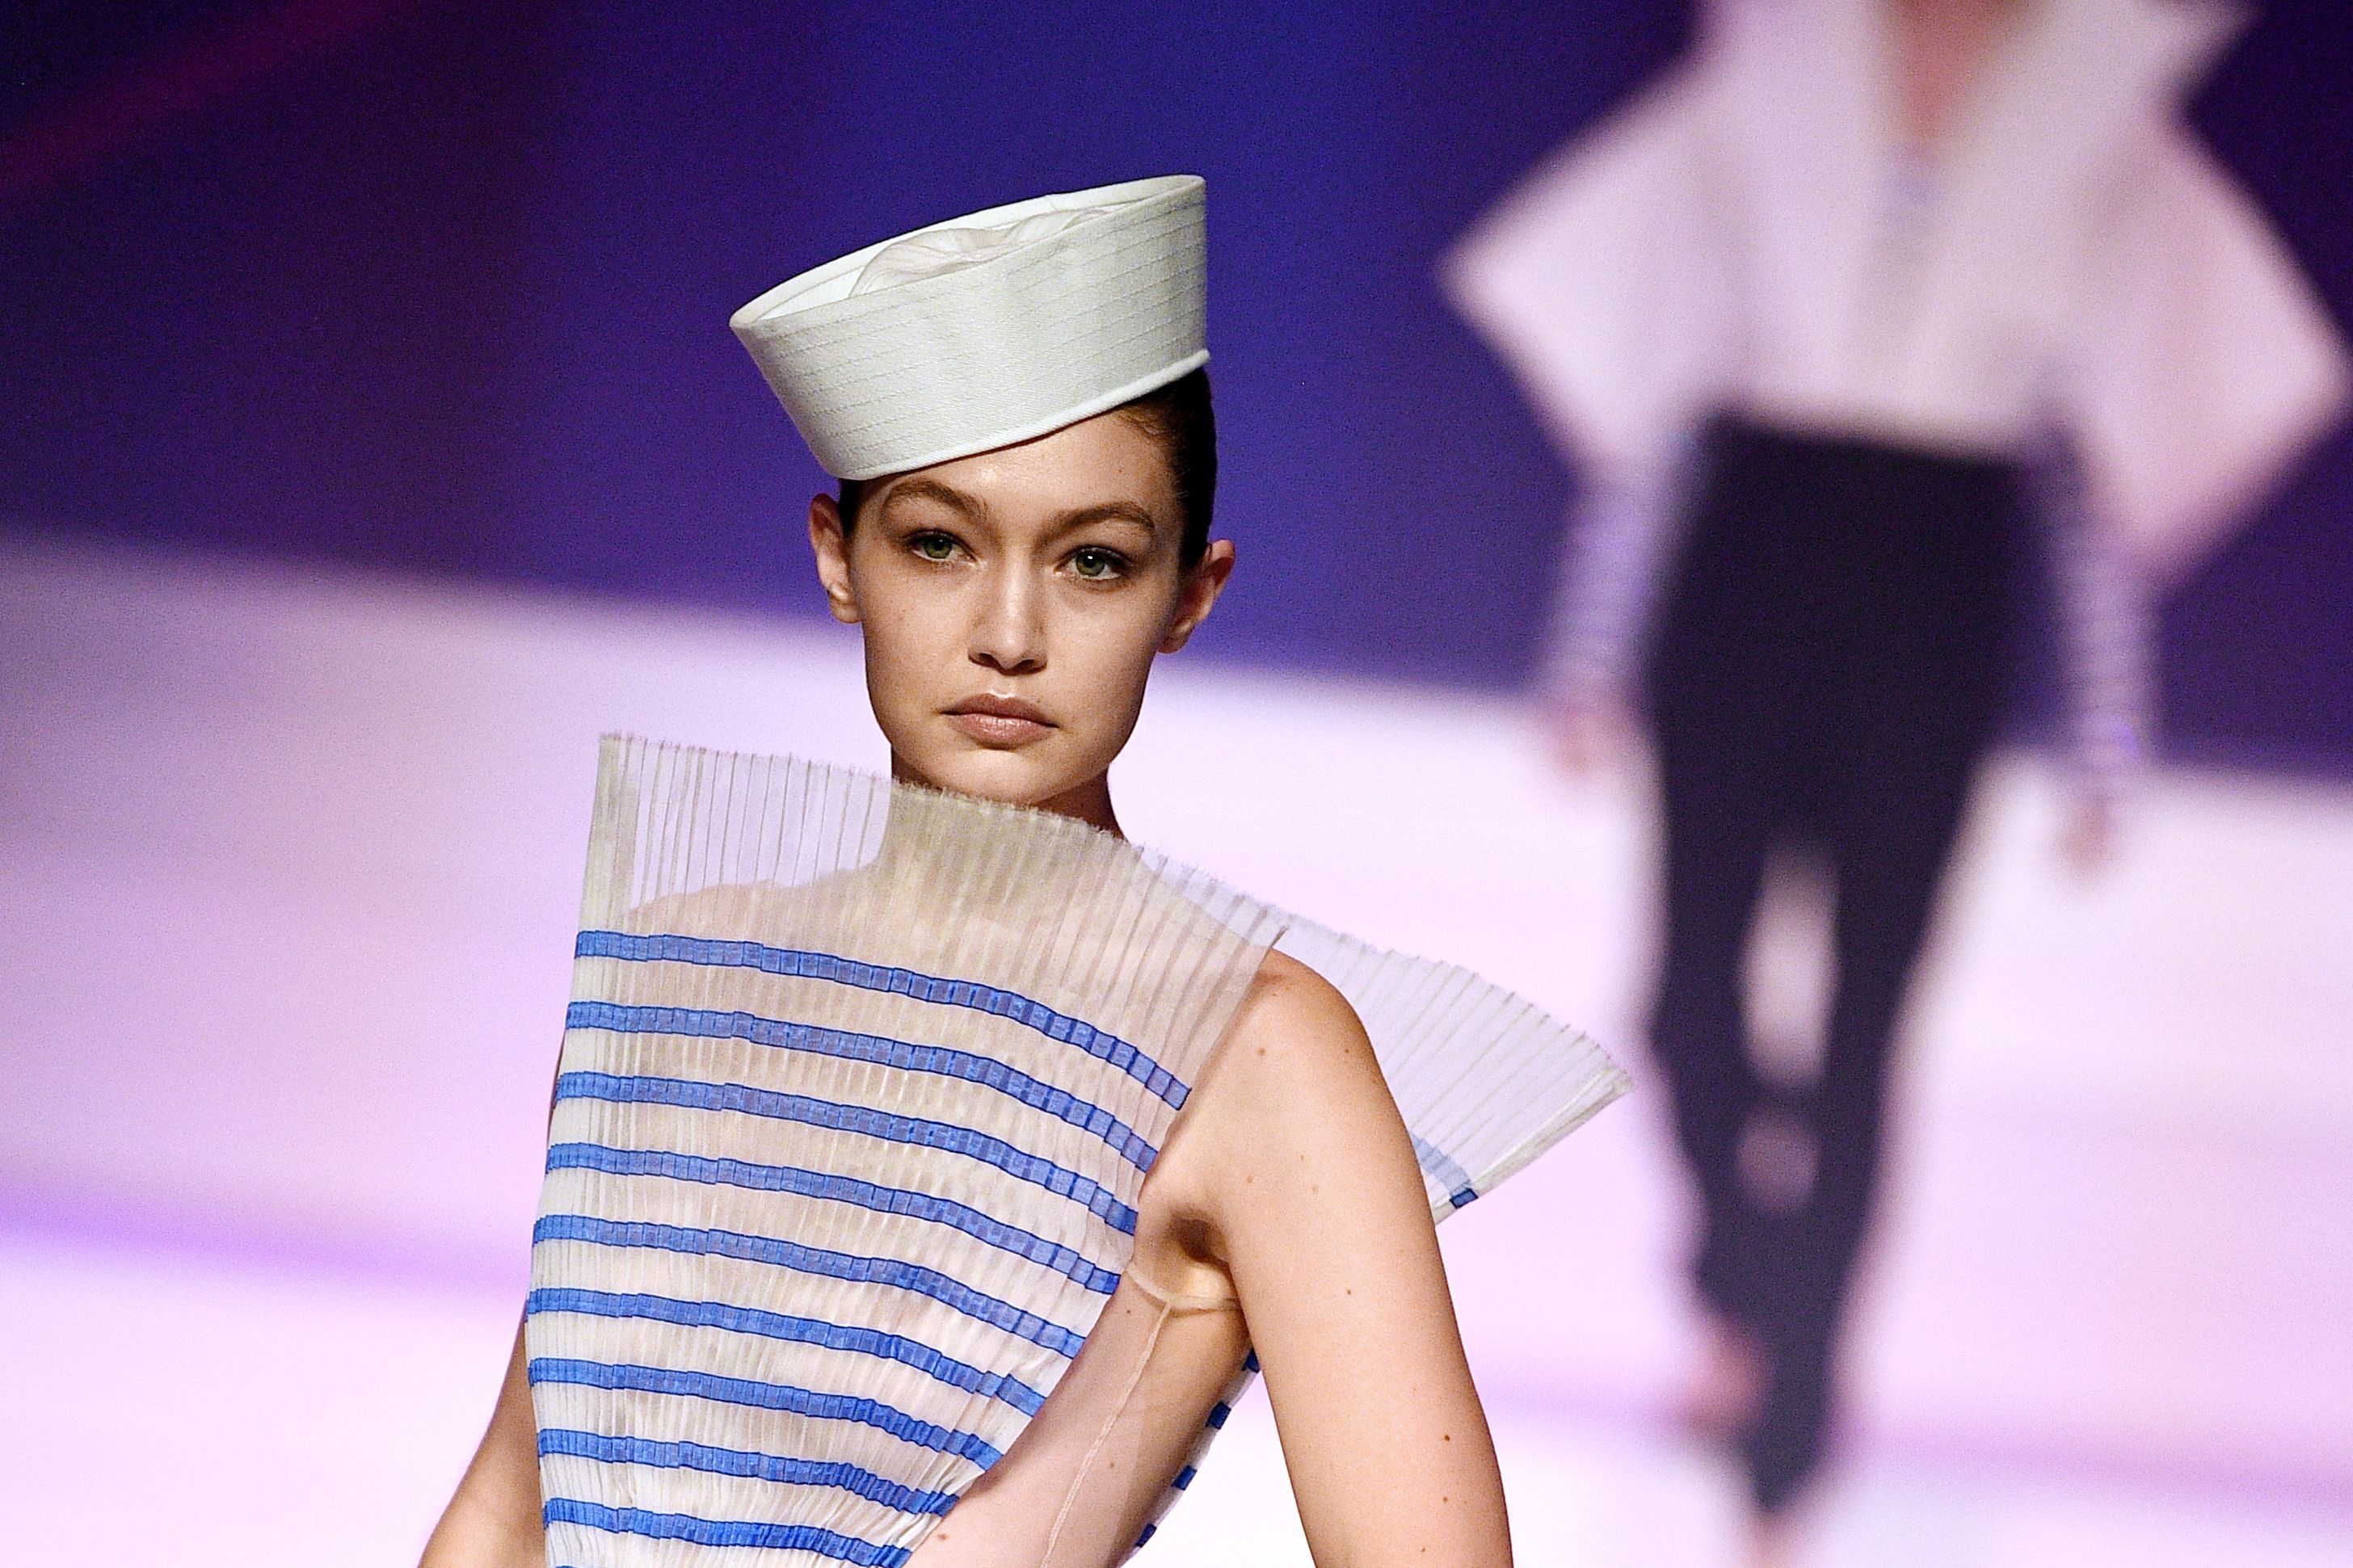 Photos from Jean-Paul Gaultier's Final Couture Show at Paris Fashion Week